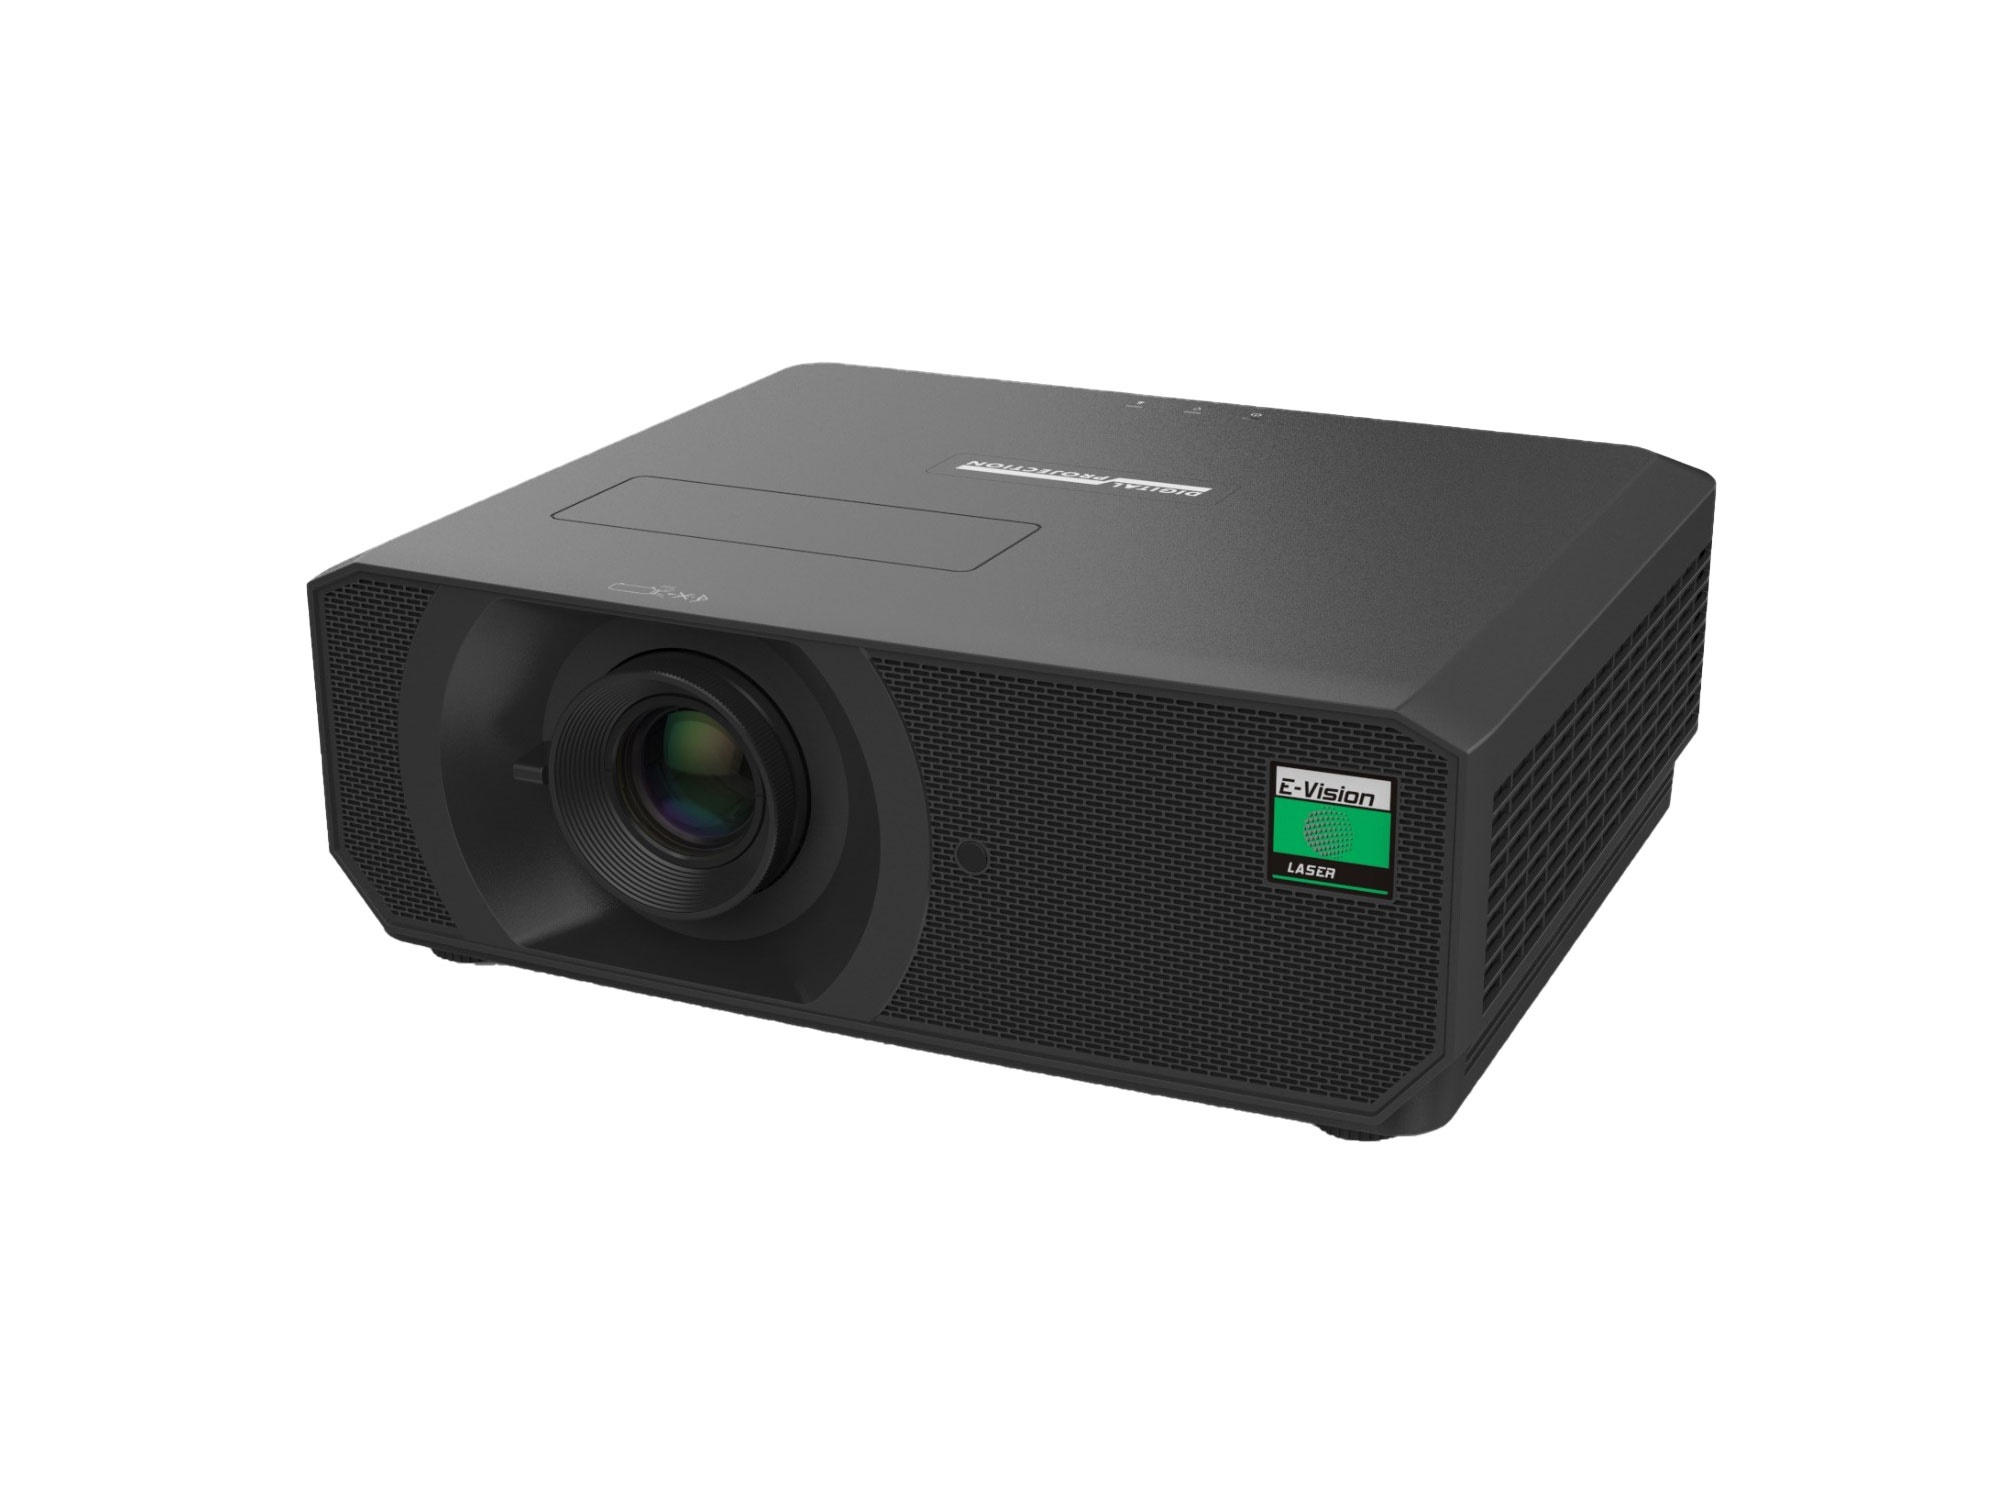 E-Vision 4000 4K-UHD 3300 ANSI/3800 ISO Lumens/500000x1 Advanced Contrast Ratio - 4K/UHD Projector by Digital Projection